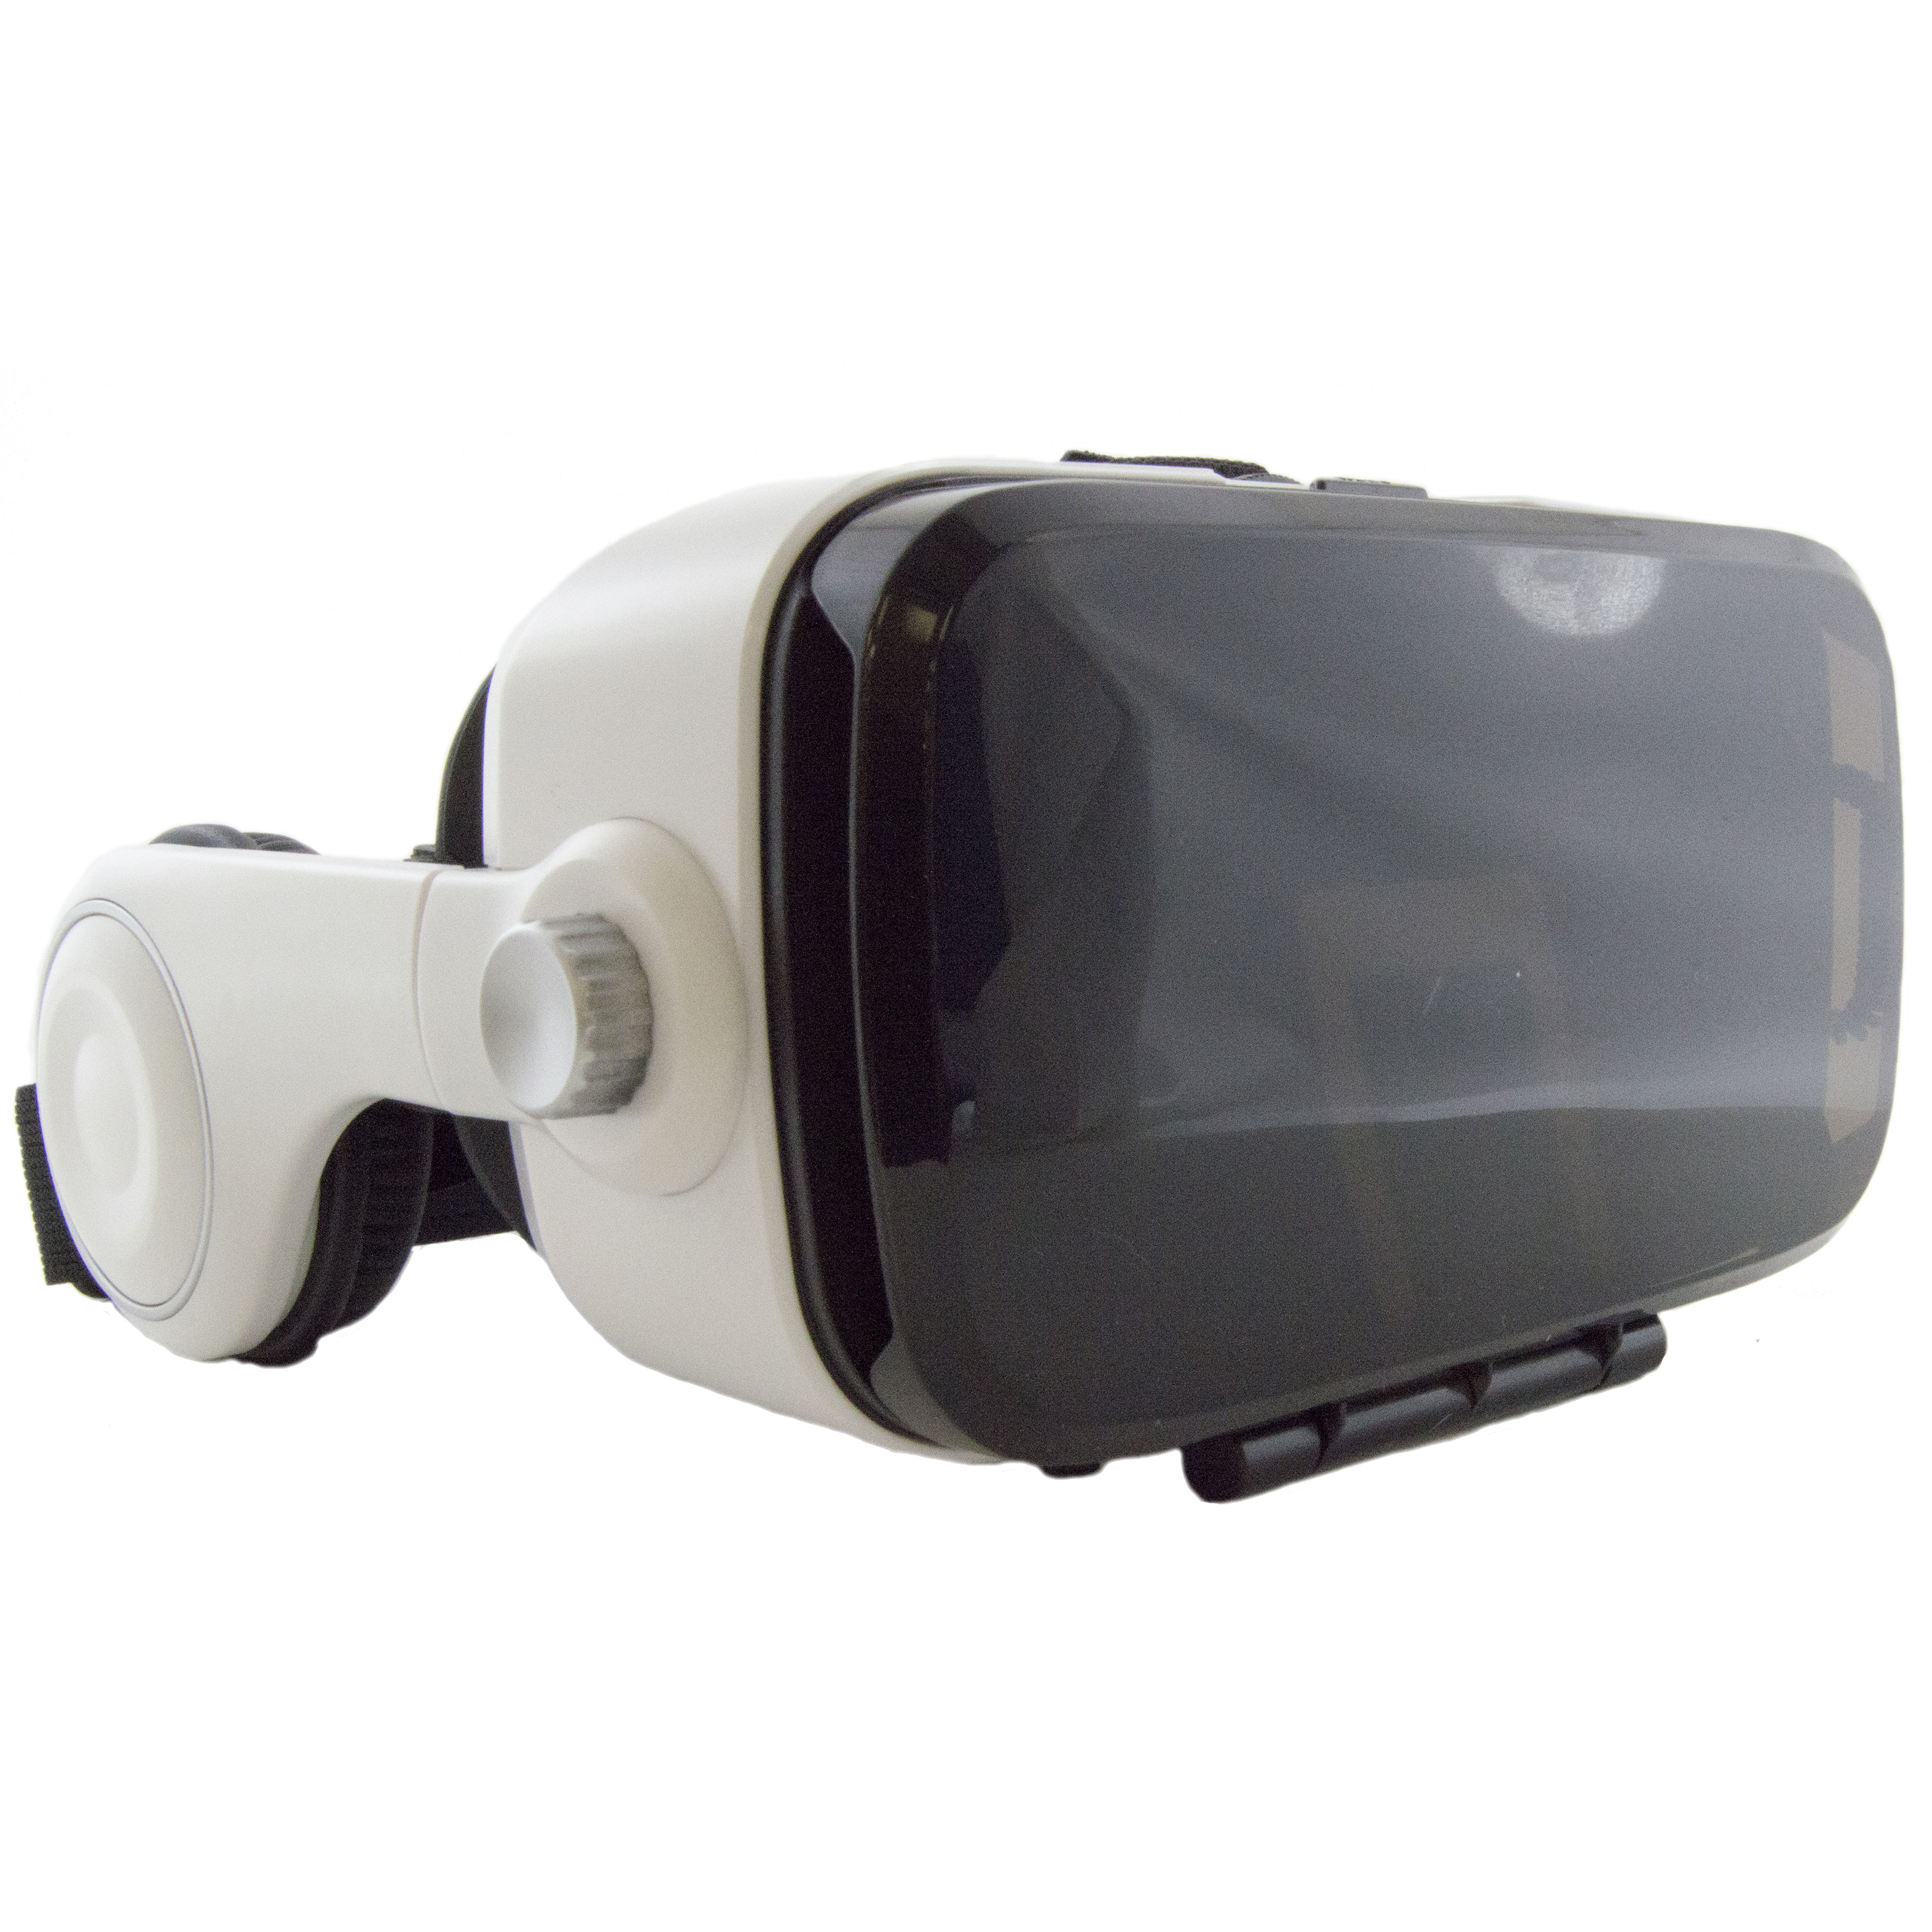 3D VR Headset with Stereo Headphones for all 4.7" to 6.2" Smartphones - image 1 of 7